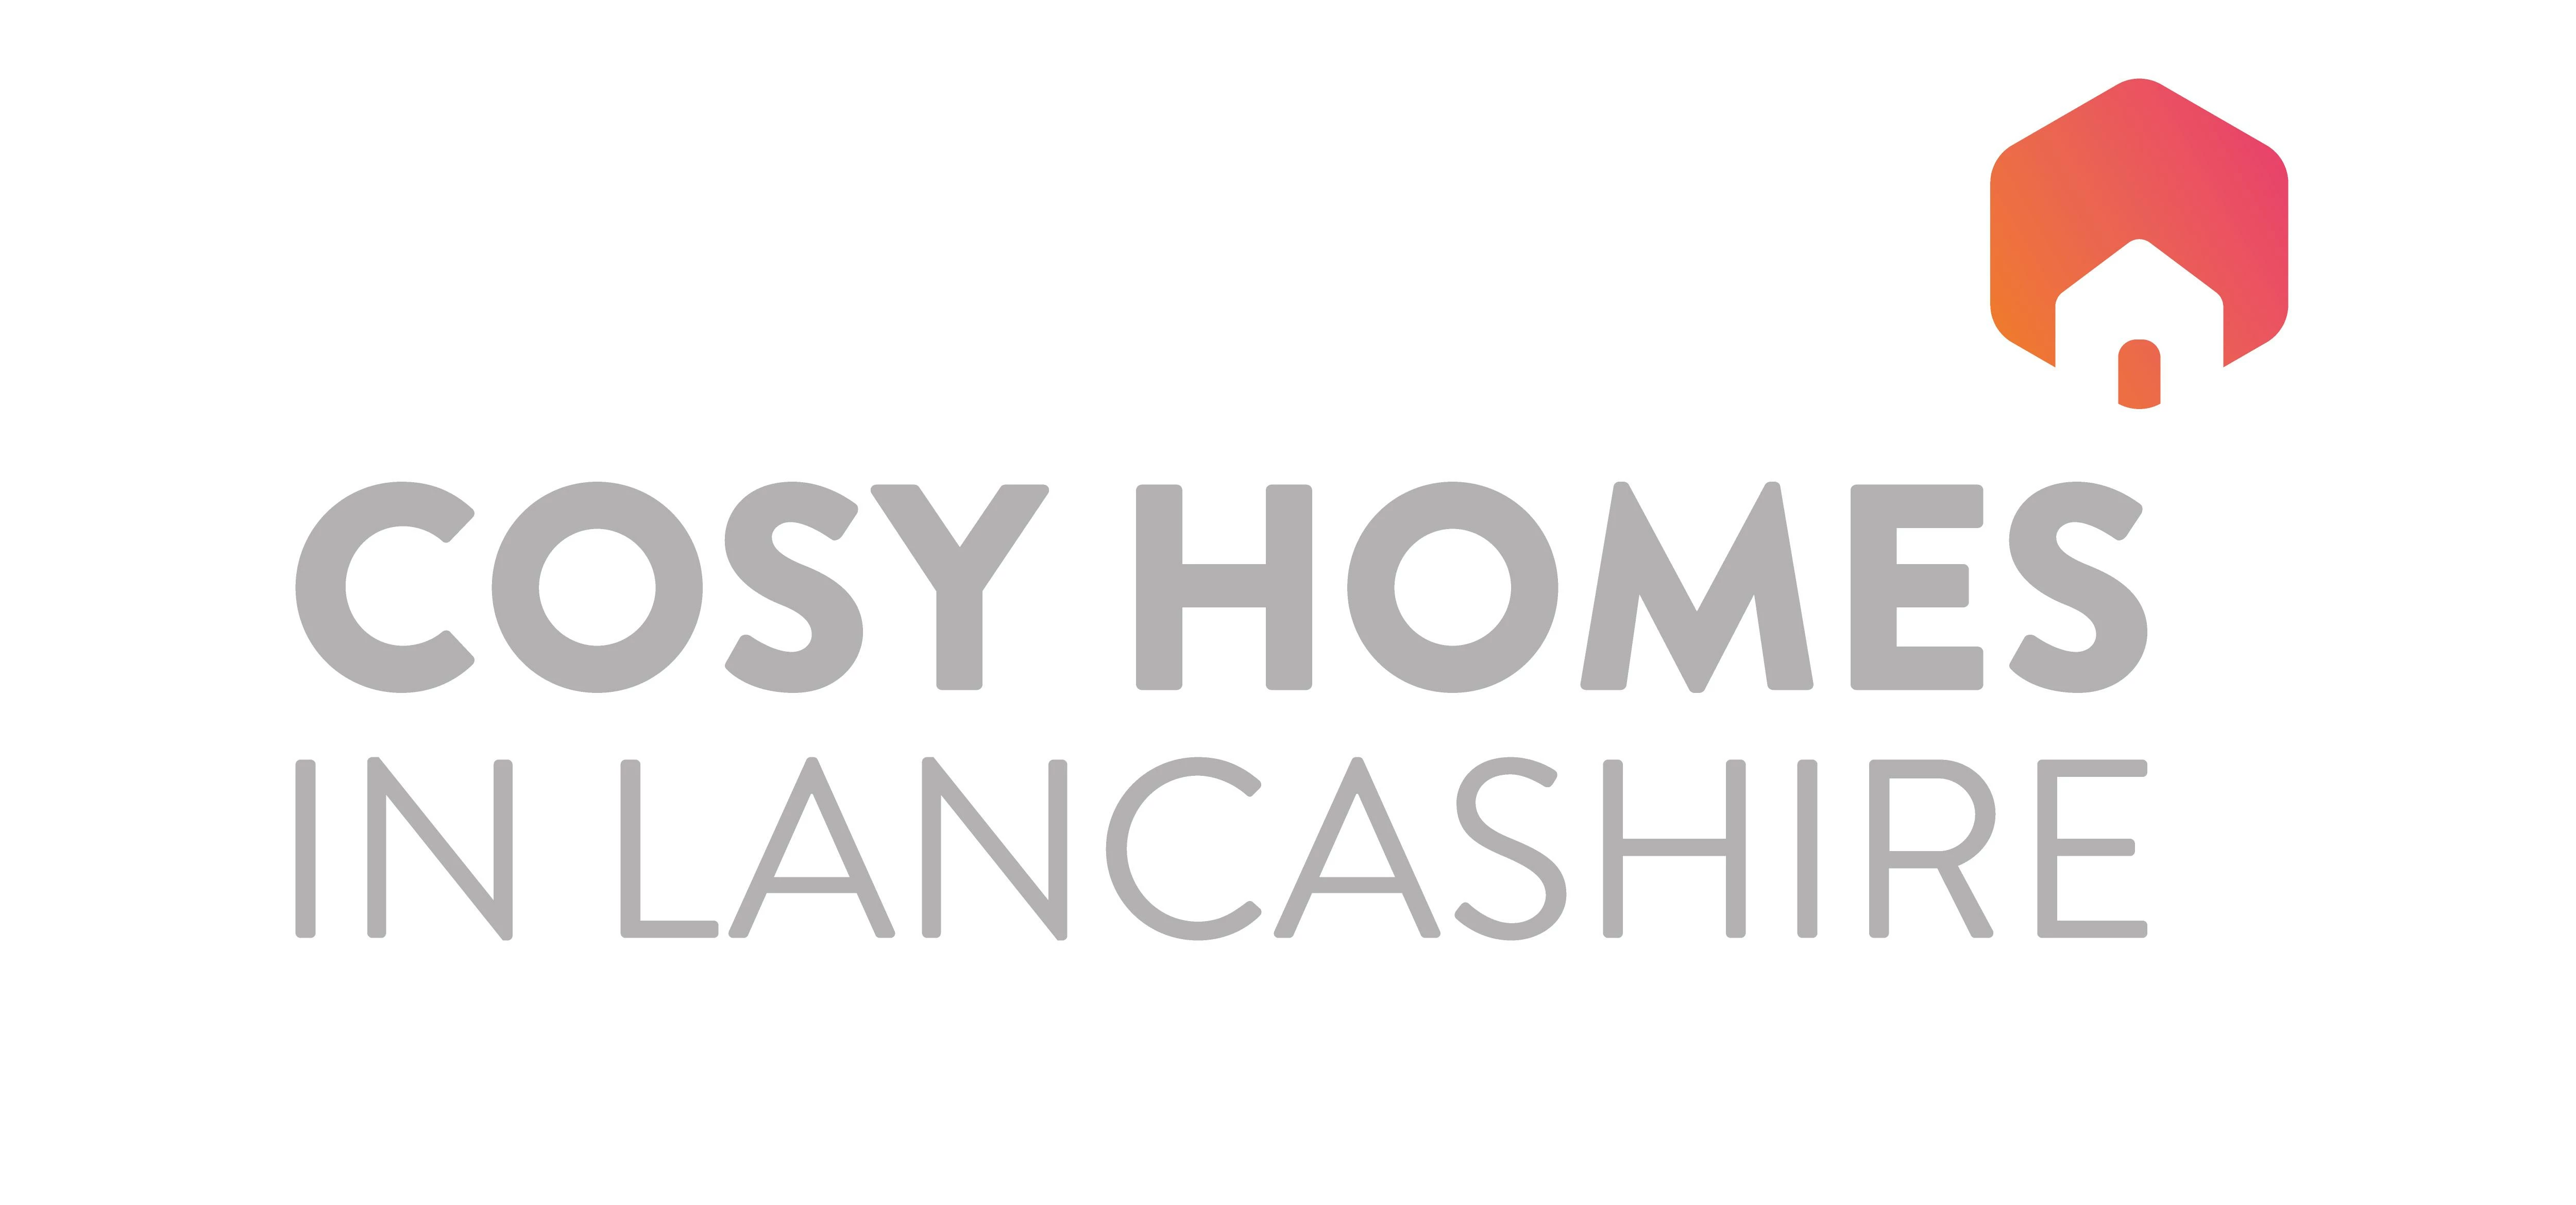 CHiL (Cosy Homes in Lancashire)